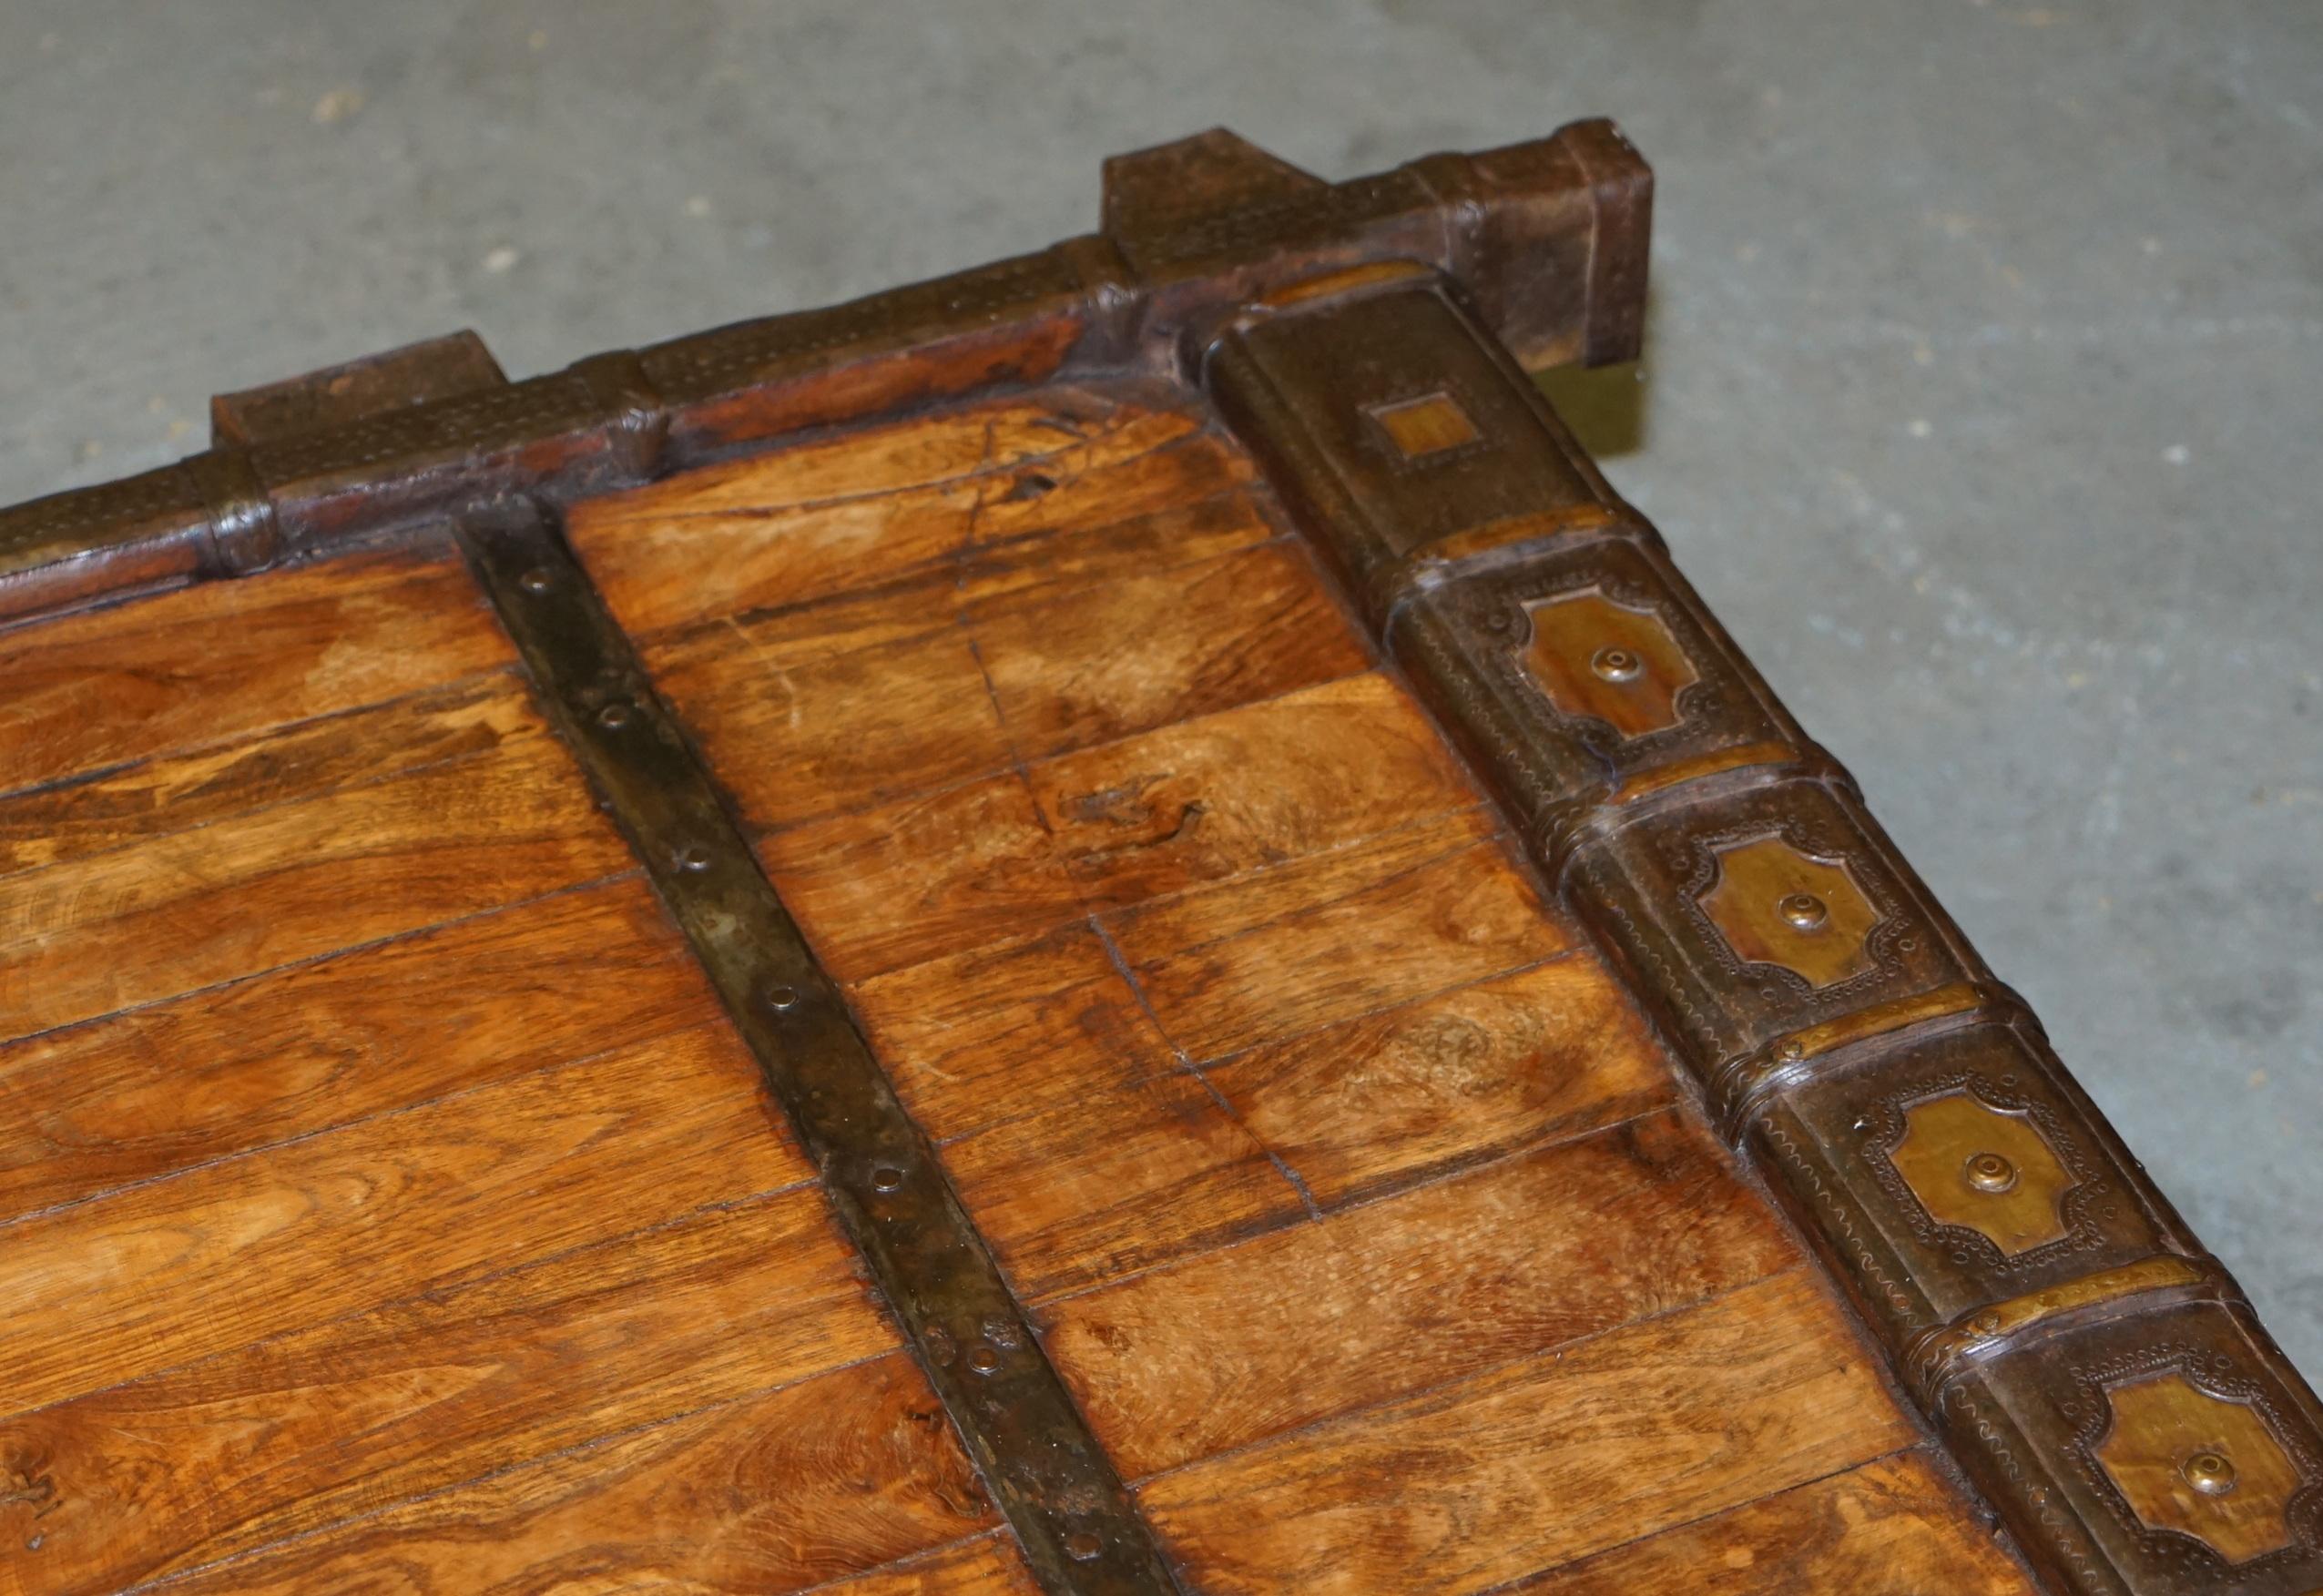 Metal ANTIQUE TIBETAN CAMEL OR OX CART RECLAiMED WOOD & METAL BOUND COFFEE TABLE For Sale